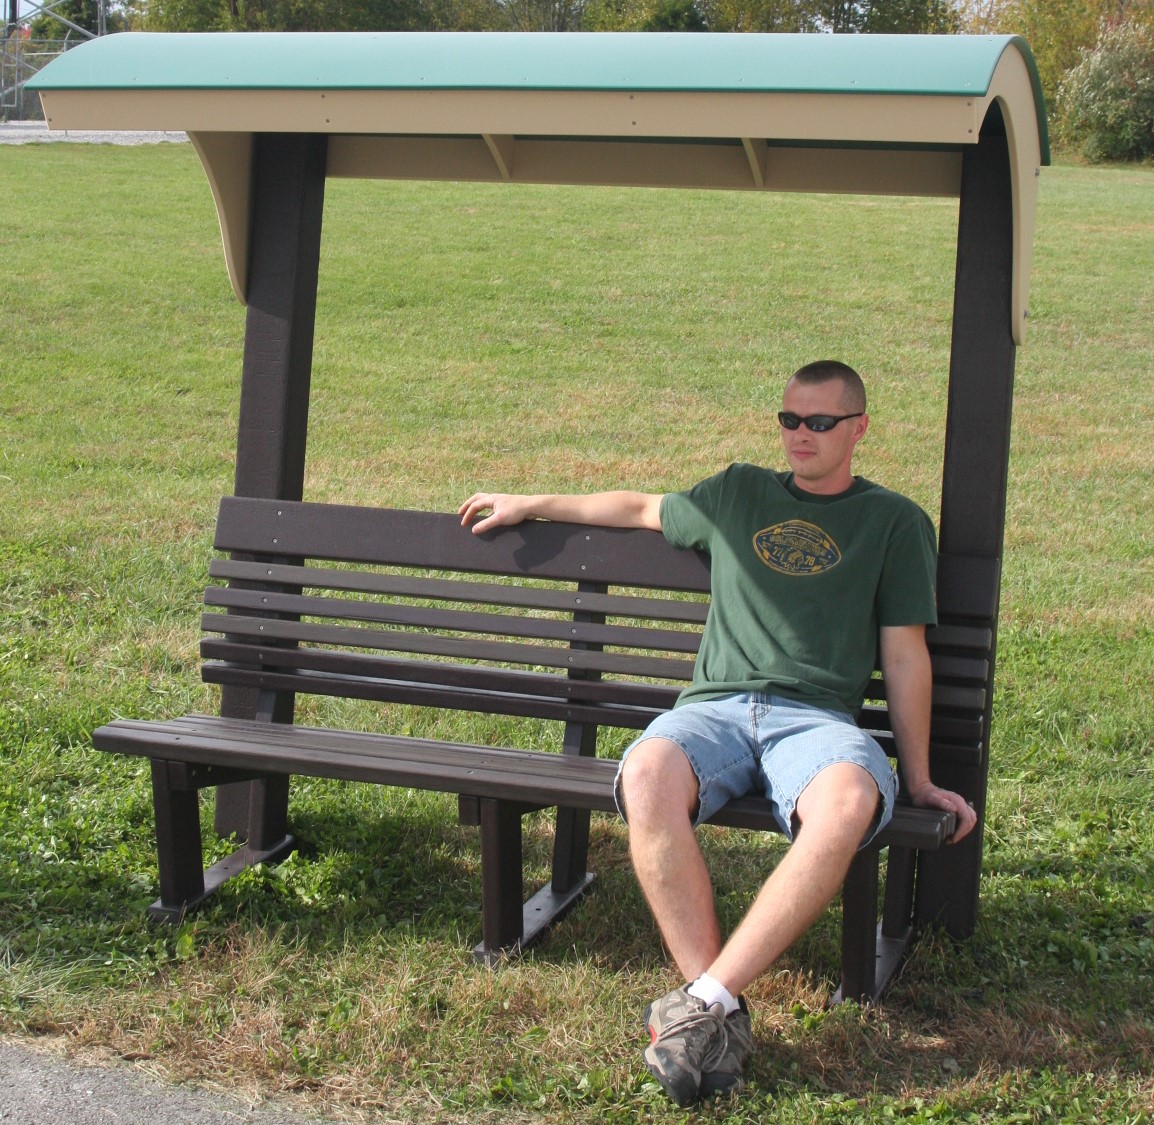 Ergo Playground Bench for Adults with Roof